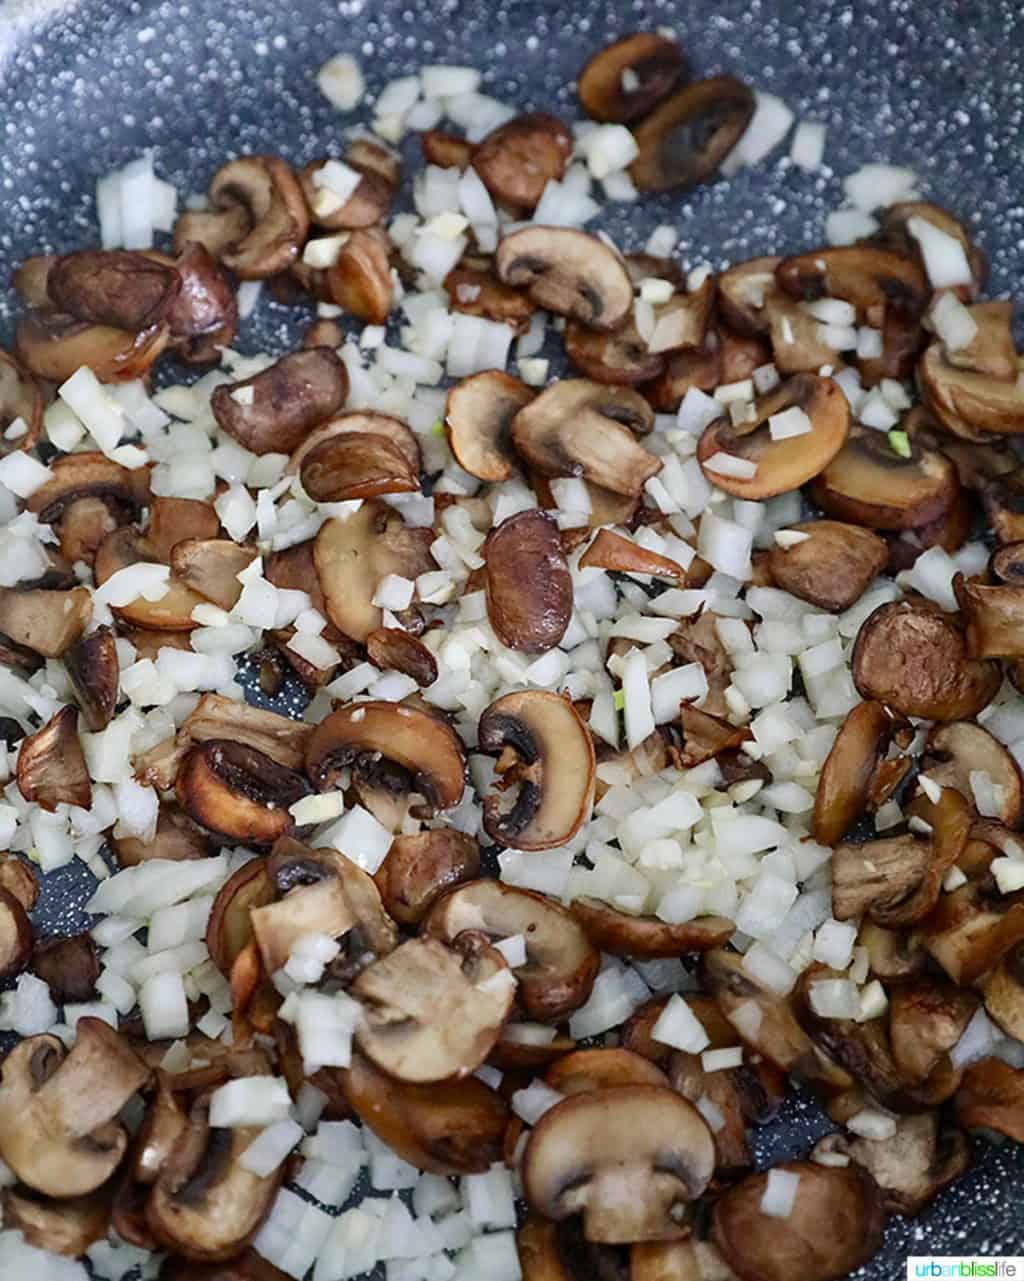 cooking mushrooms and onions